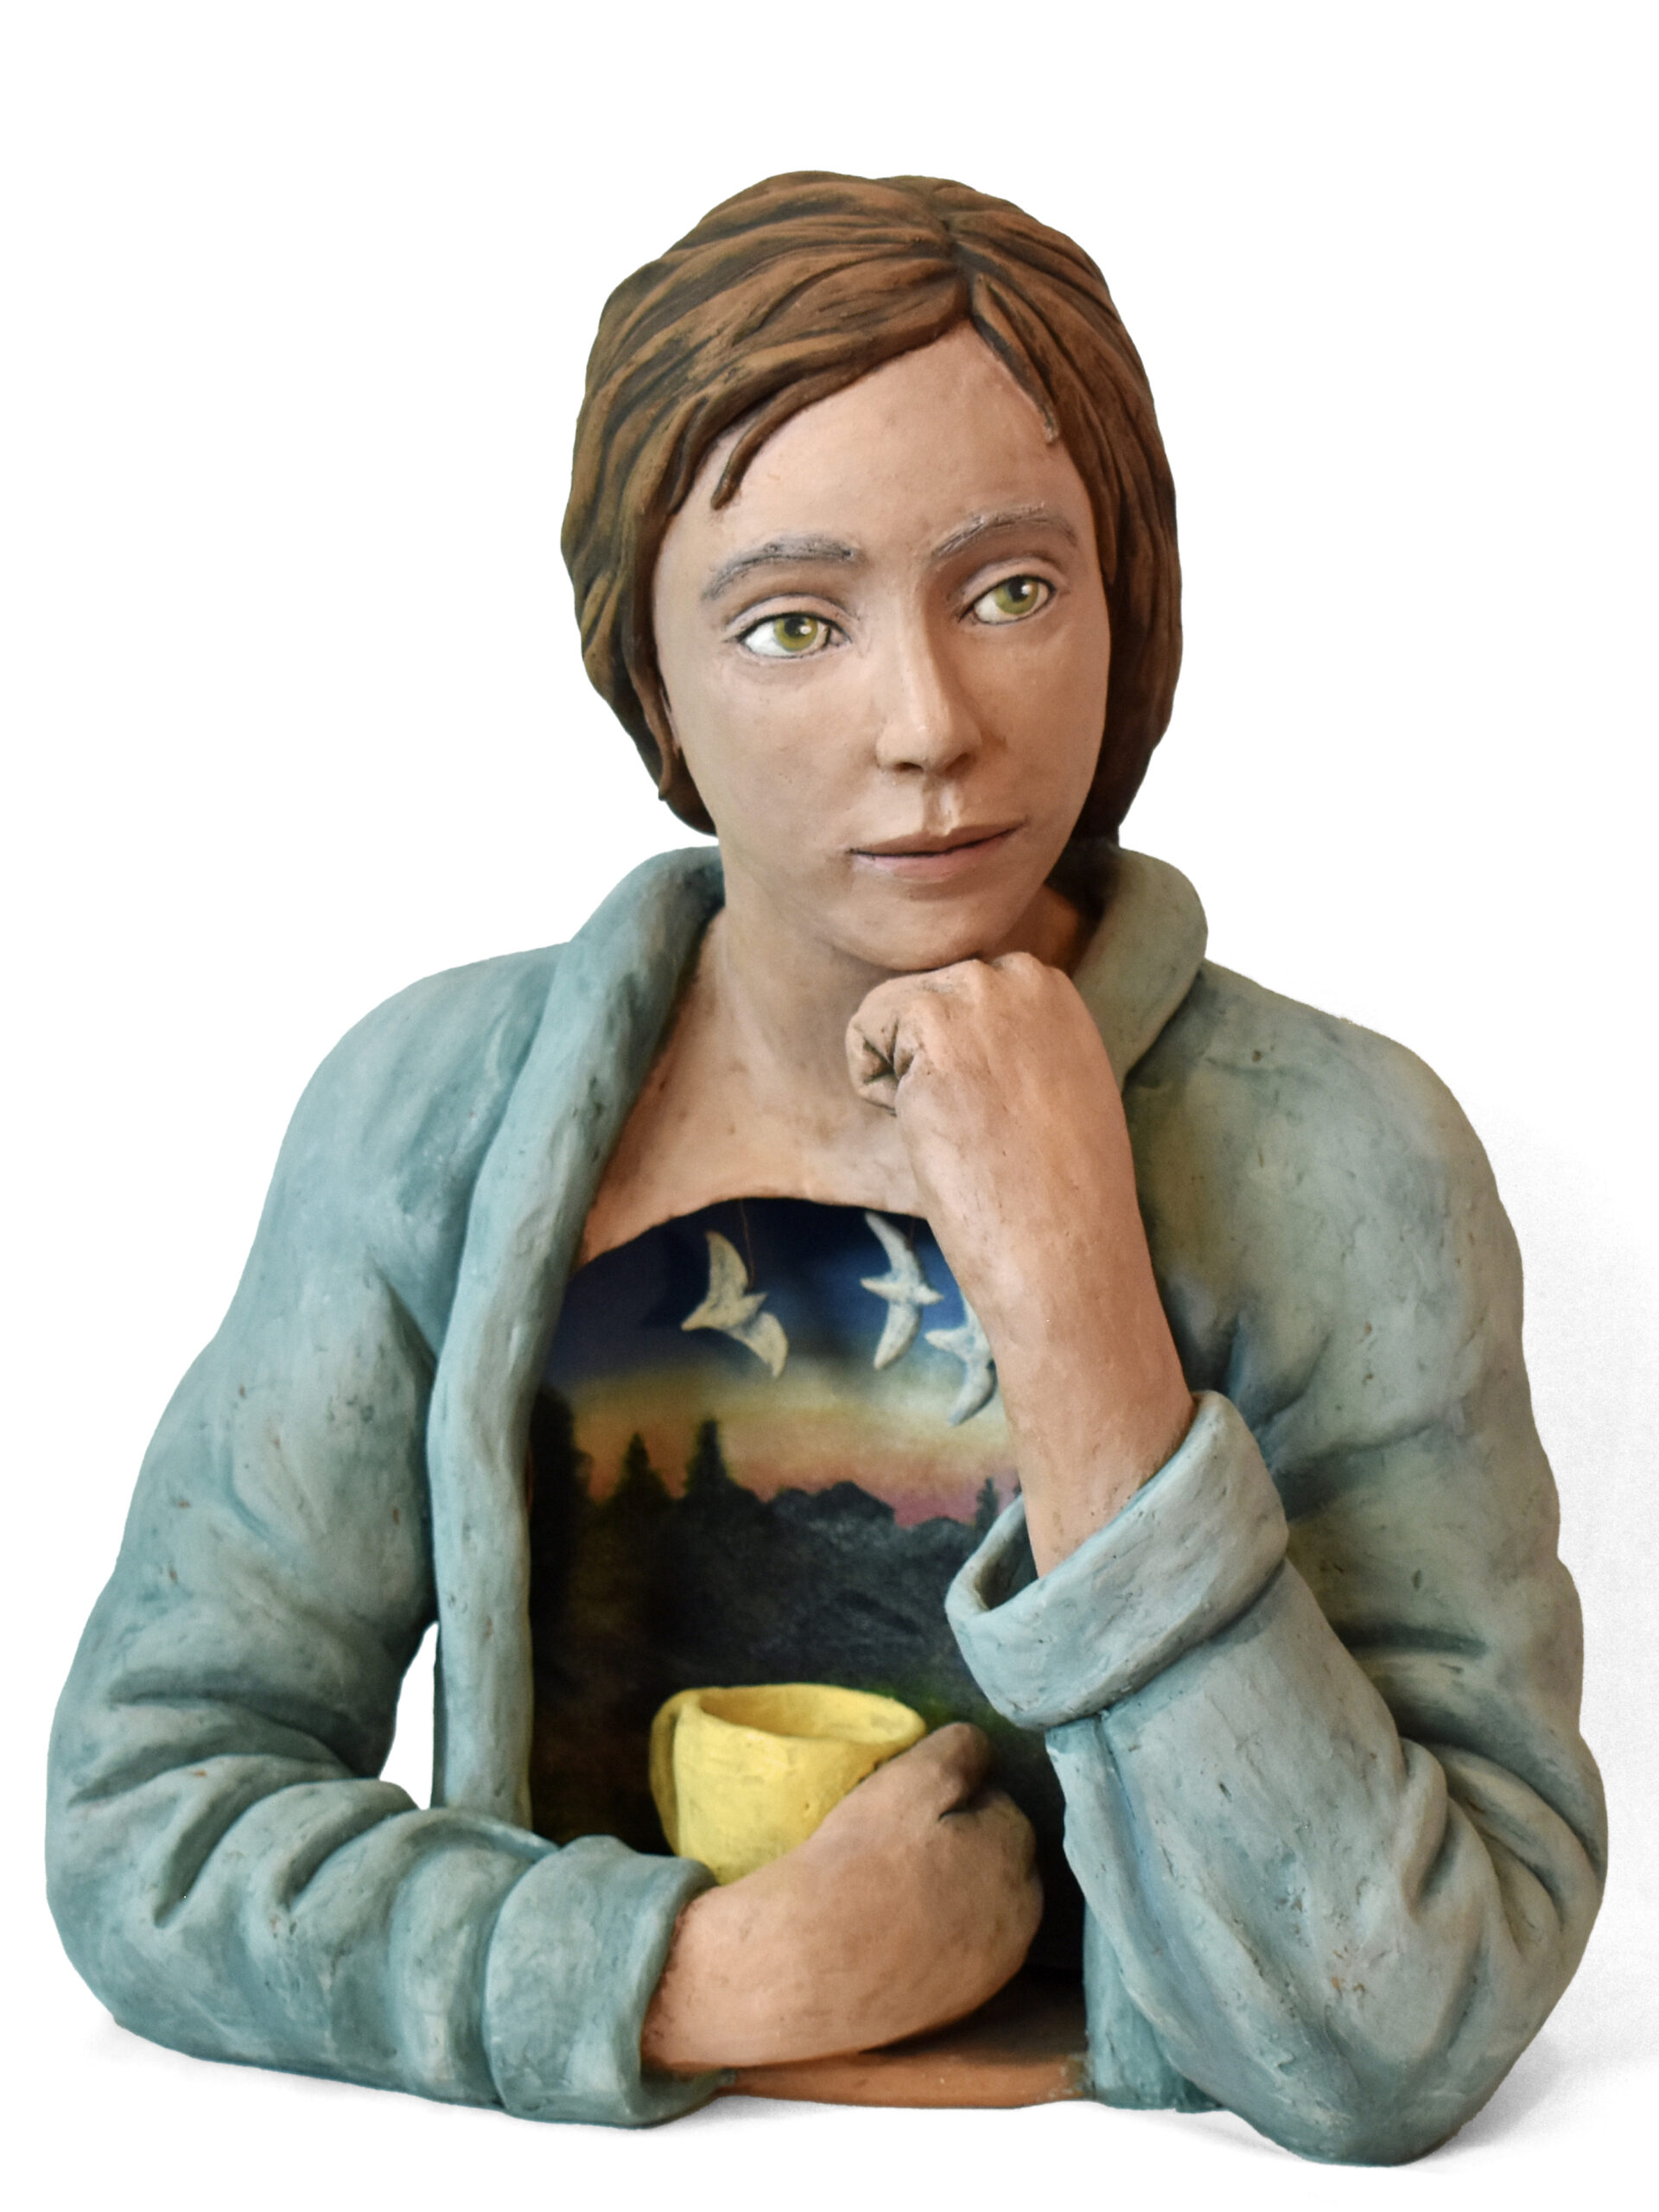 A ceramic sculpture of a woman with short cropped hair, her chin resting on her right hand, her left hand clasping a yellow mug. She is wearing a pale blue jacket and a t-shirt with a print of white seagulls flying over pine trees silhouetted against a dawn sky.